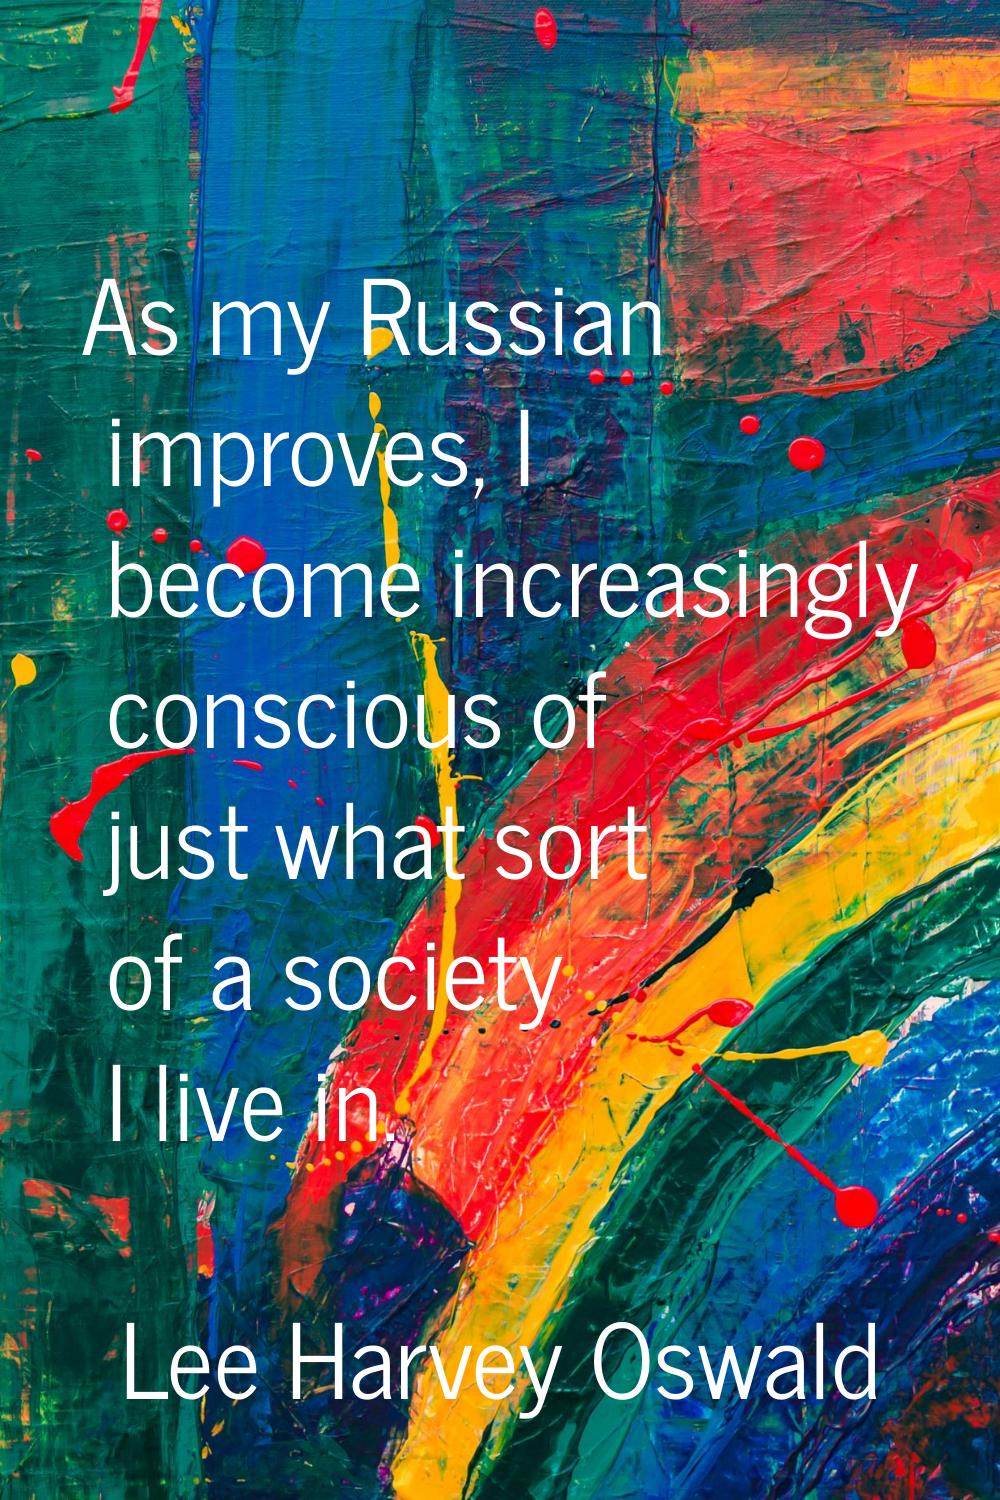 As my Russian improves, I become increasingly conscious of just what sort of a society I live in.